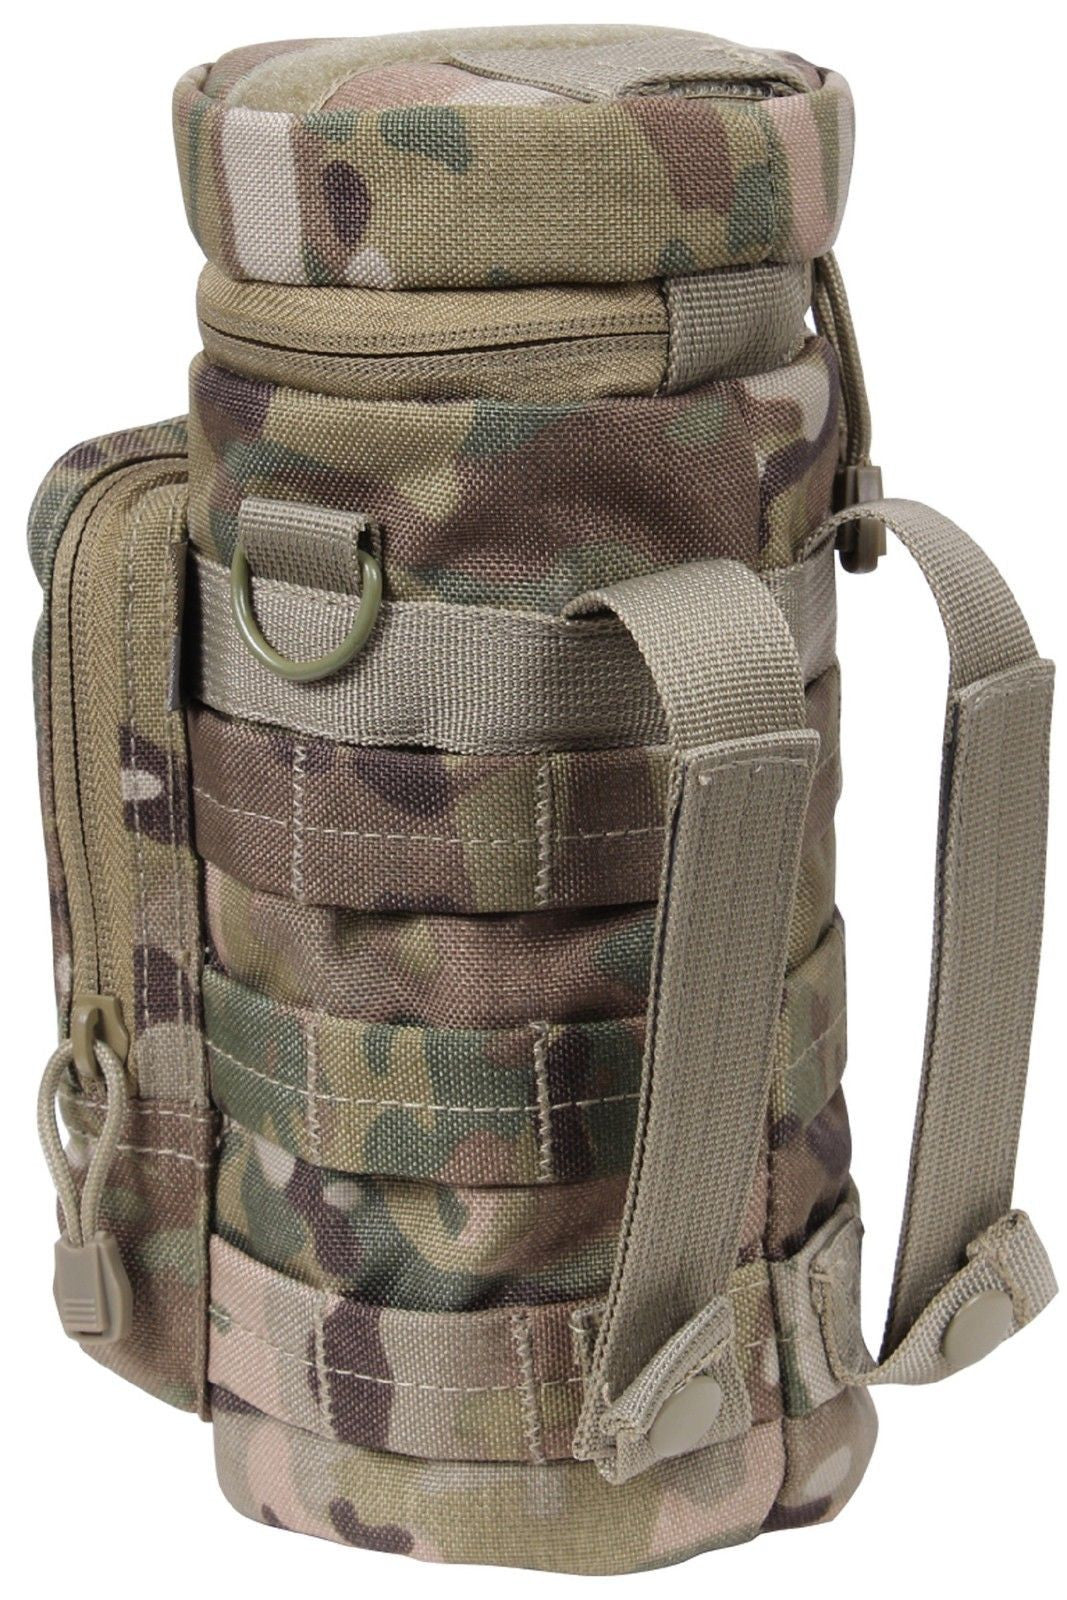 MultiCam MOLLE Compatible Water Bottle Pouch 11" Hunting Camping Tactical Pouch